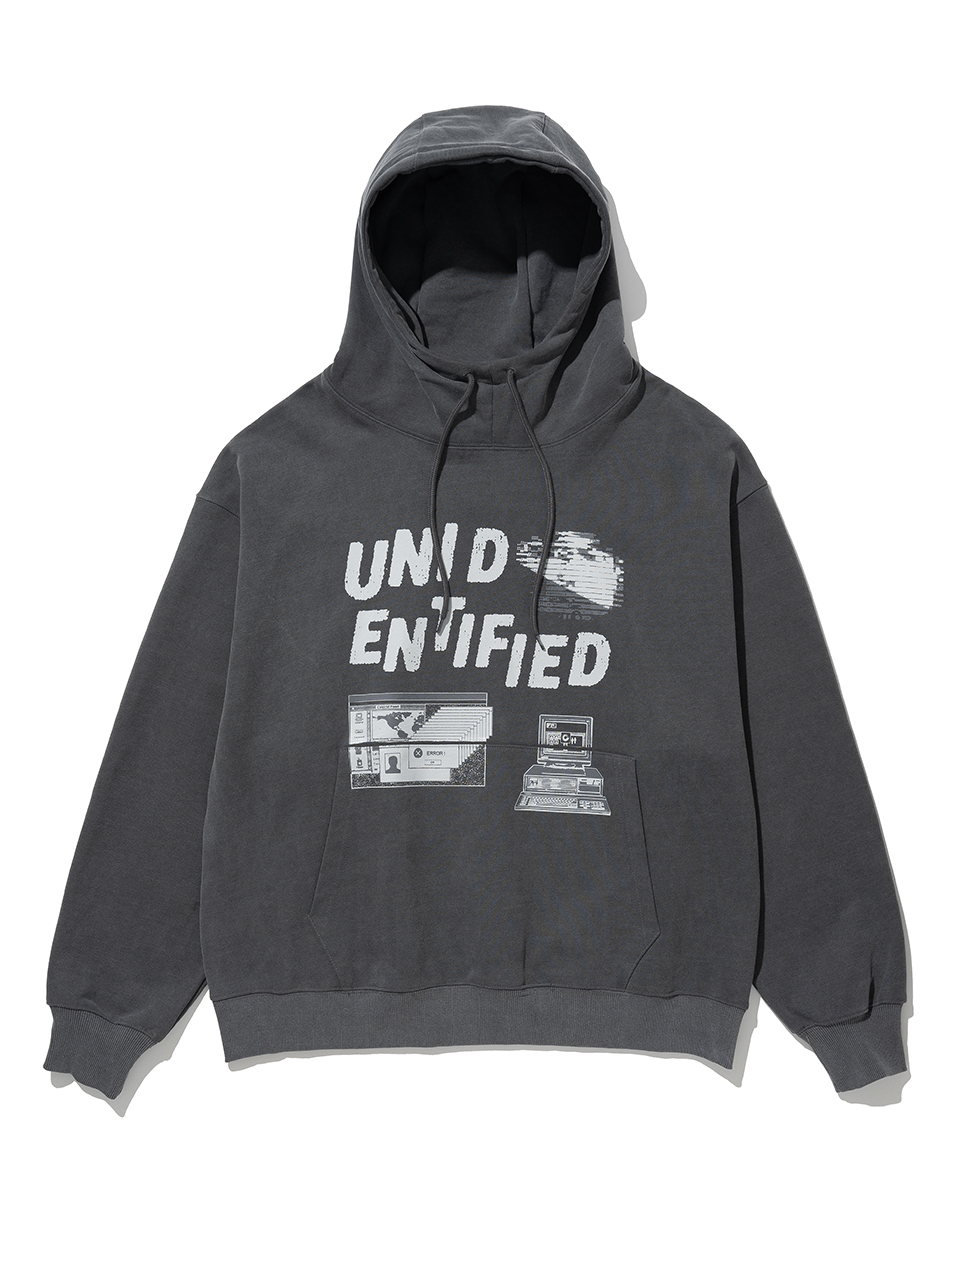 UnIdentified Hoodie - Cement Gray